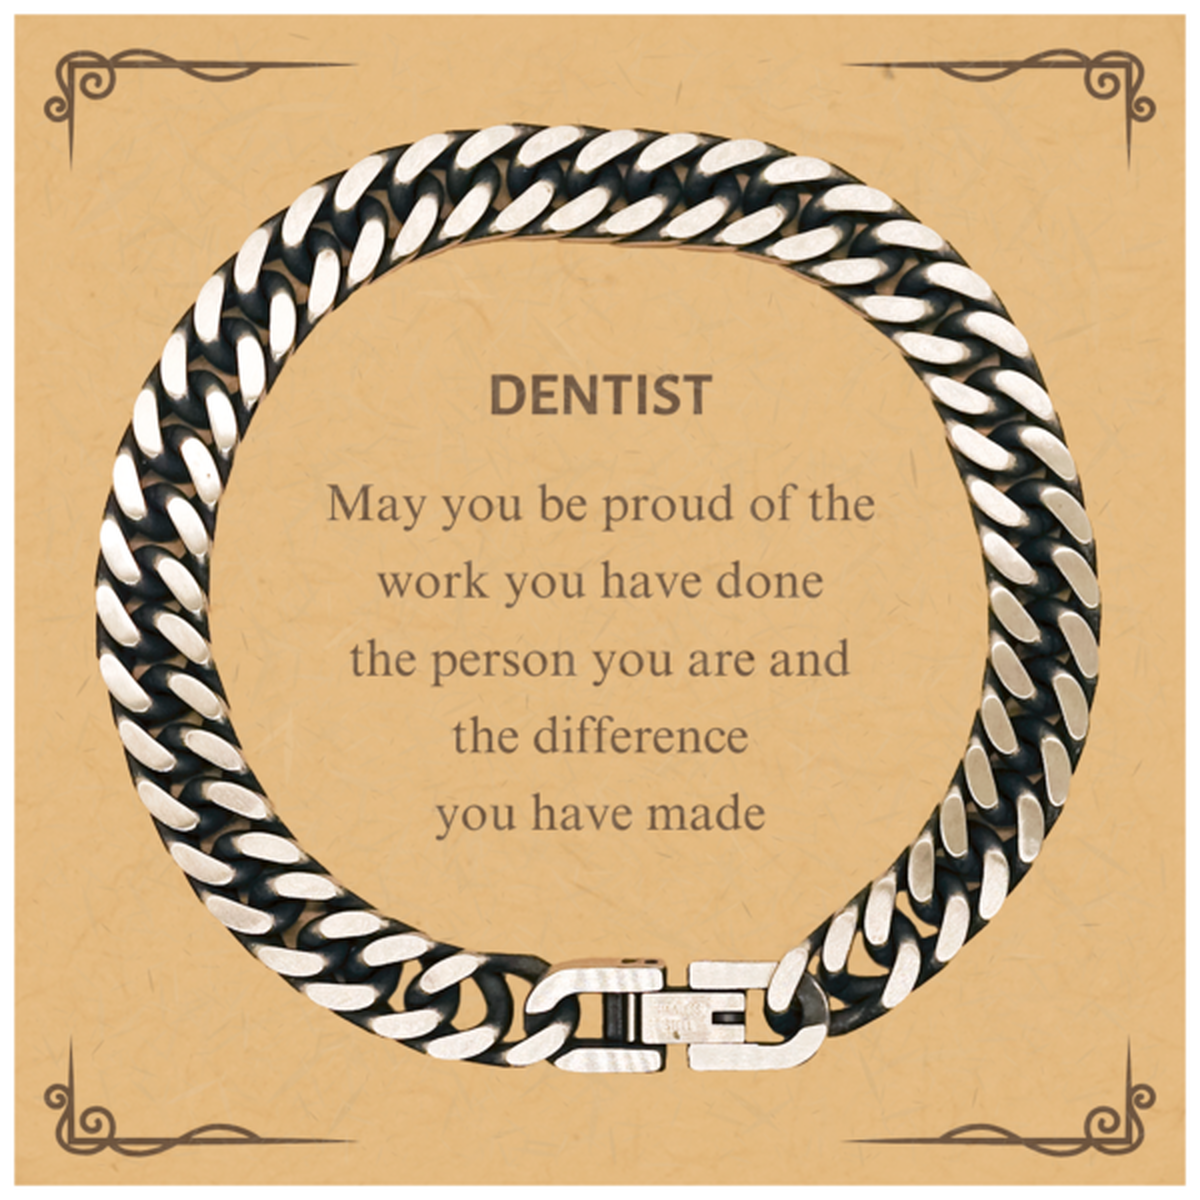 Dentist May you be proud of the work you have done, Retirement Dentist Cuban Link Chain Bracelet for Colleague Appreciation Gifts Amazing for Dentist